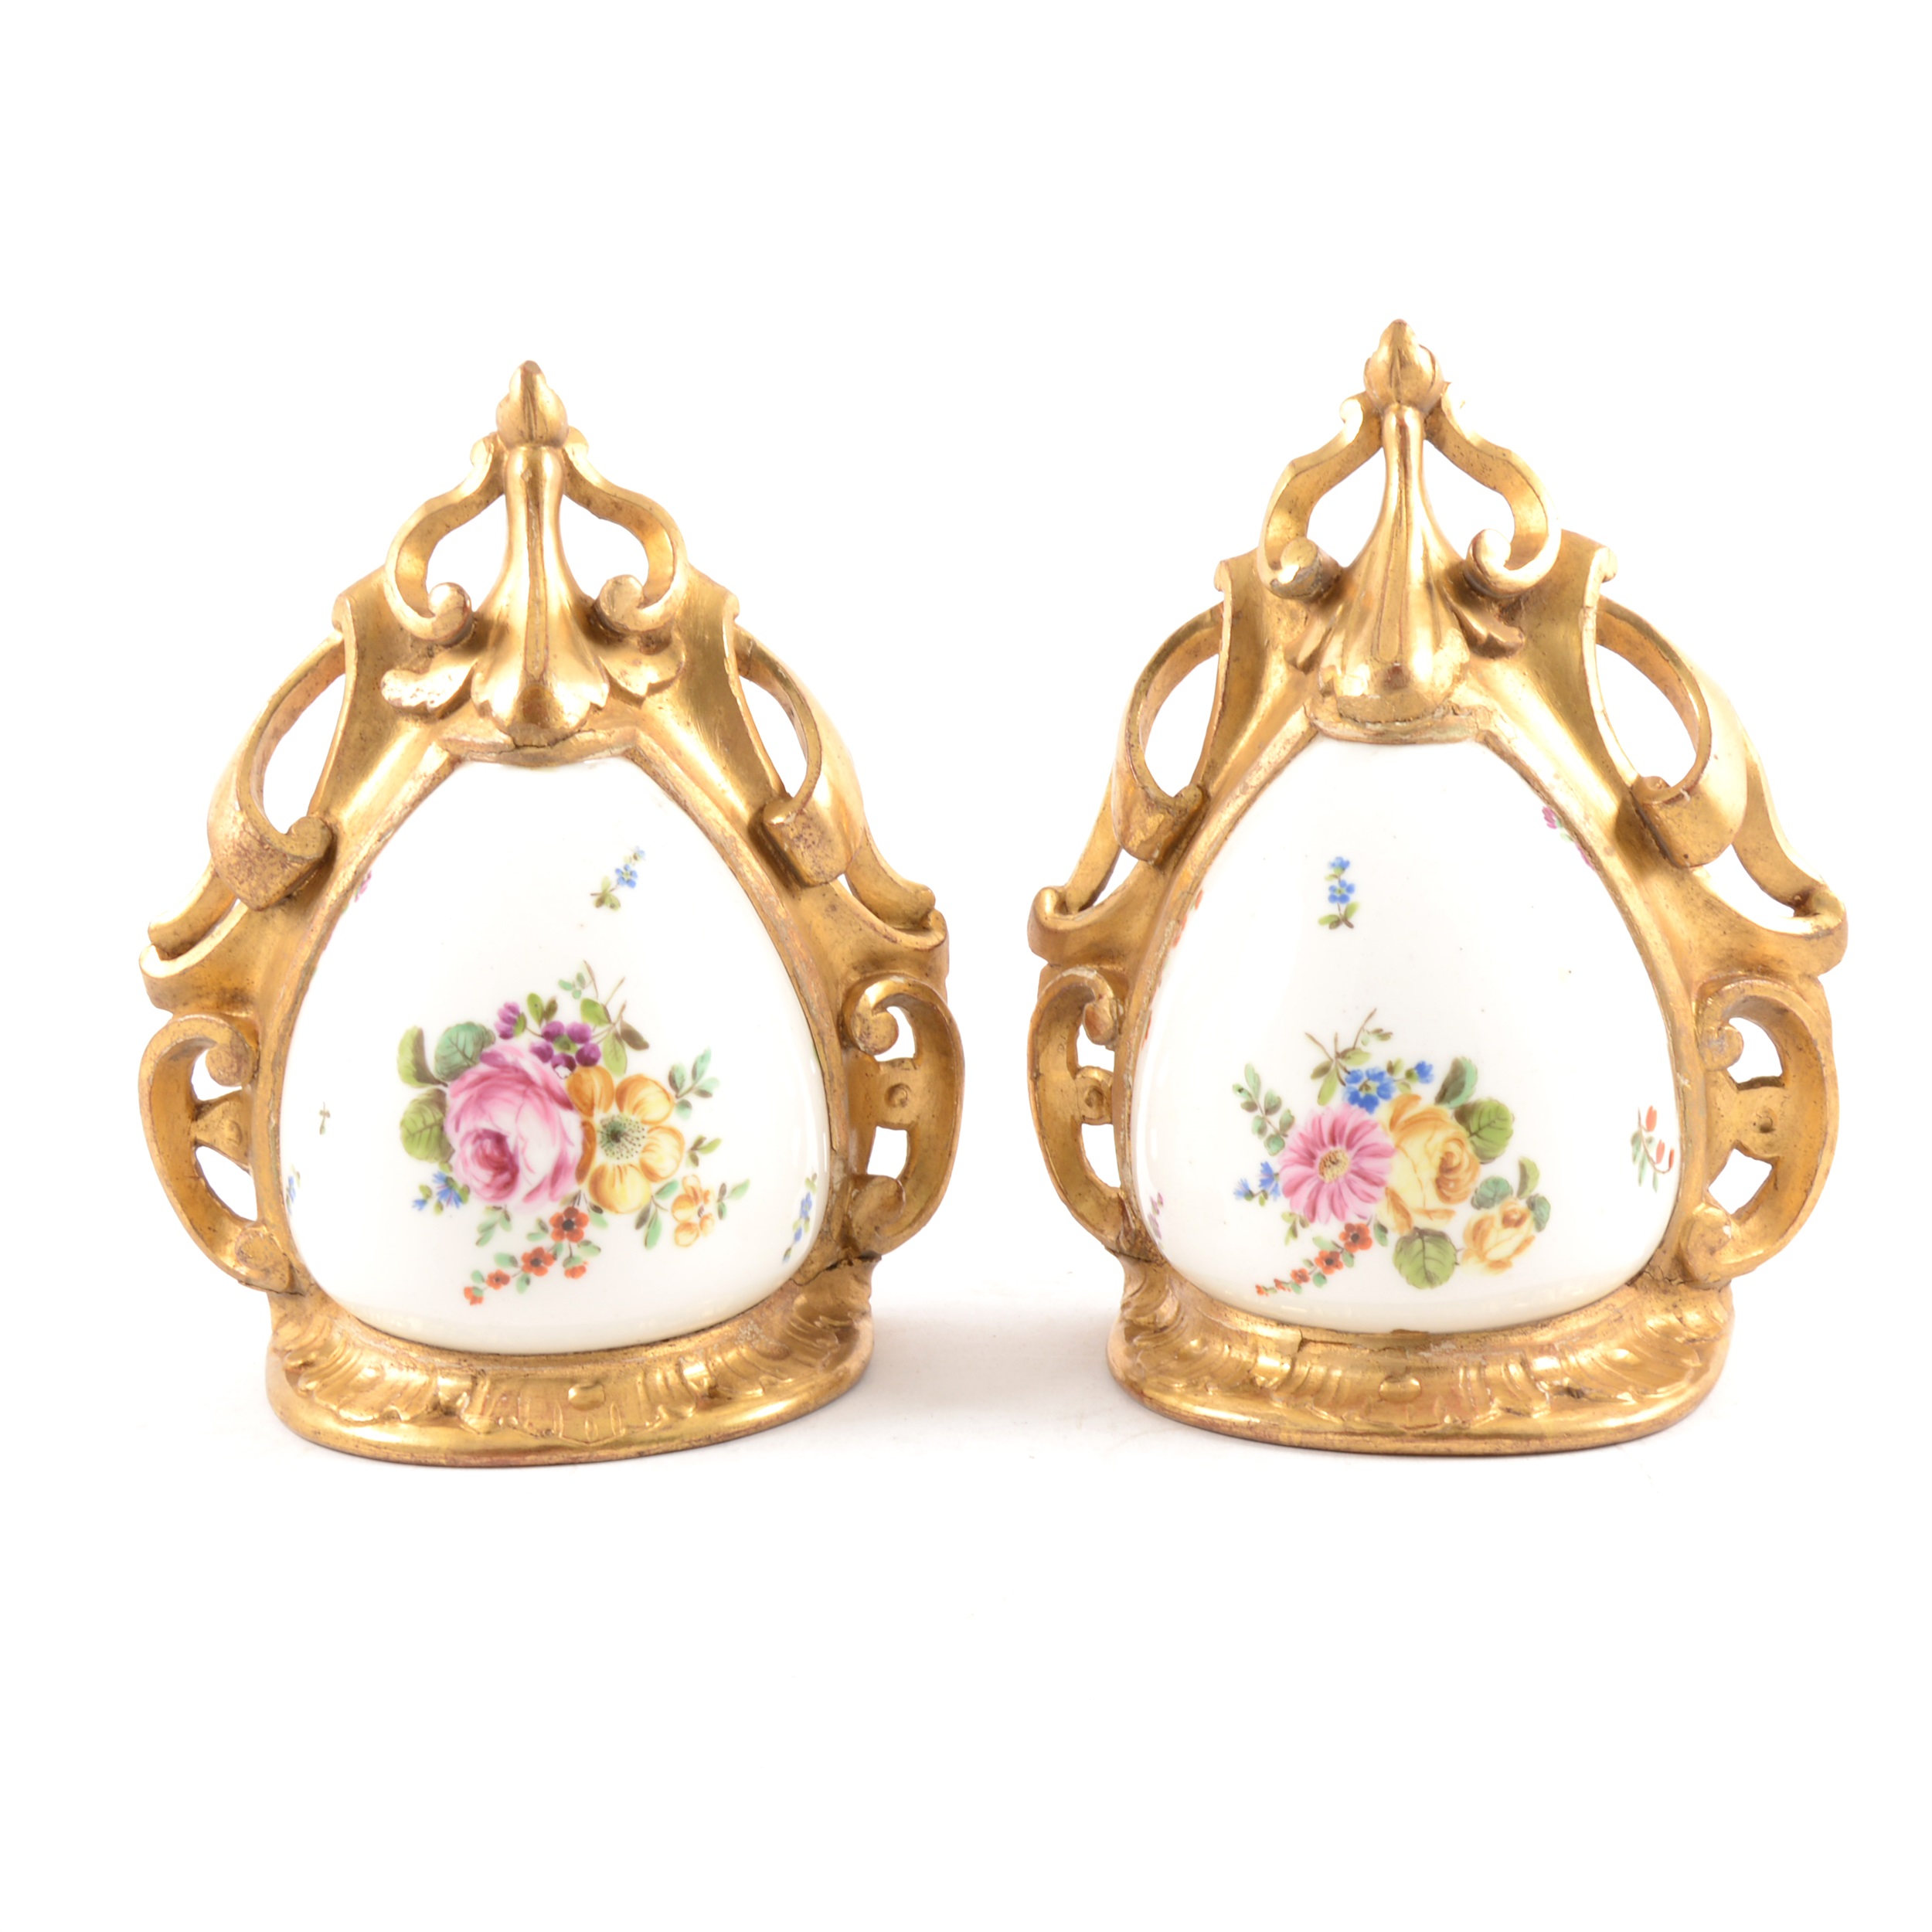 Pair of porcelain mounted gilt wood wall brackets